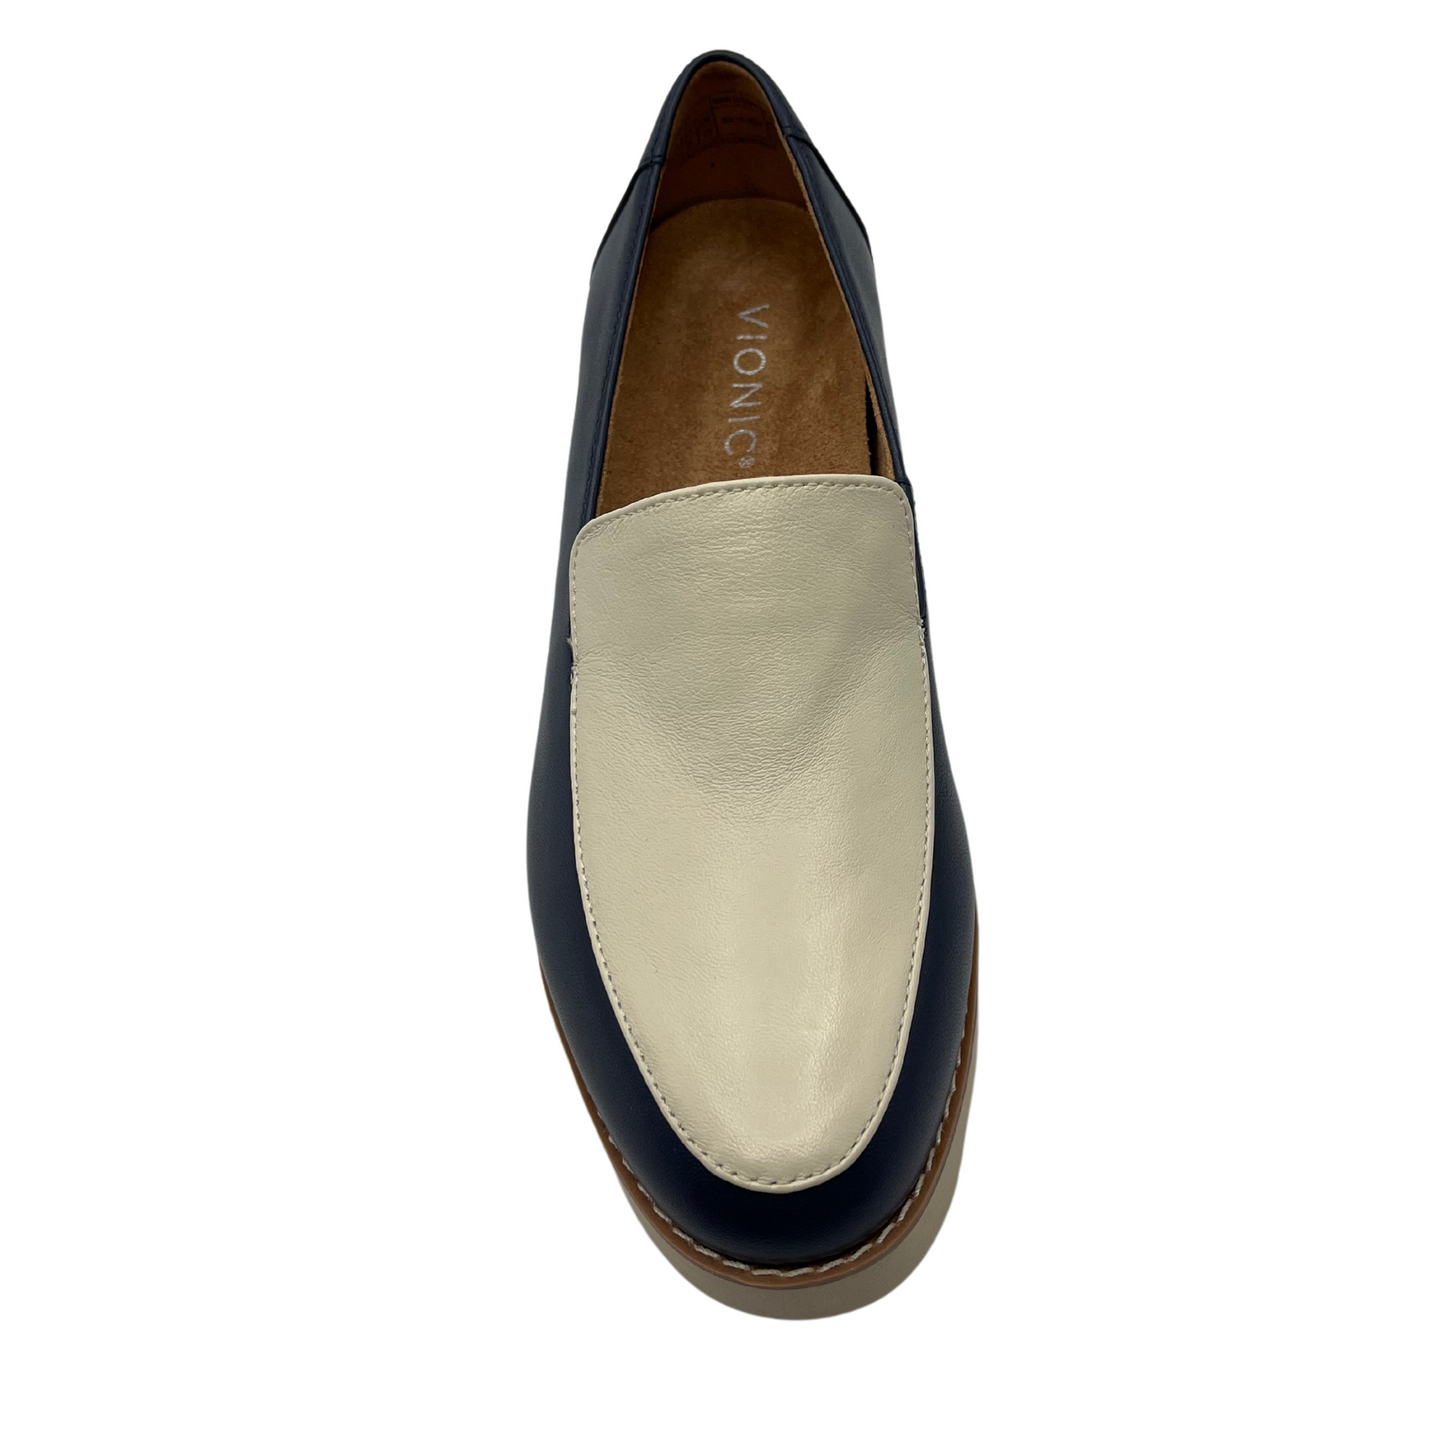 Top view of navy and cream leather loafer with leather lining and chunky rubber sole